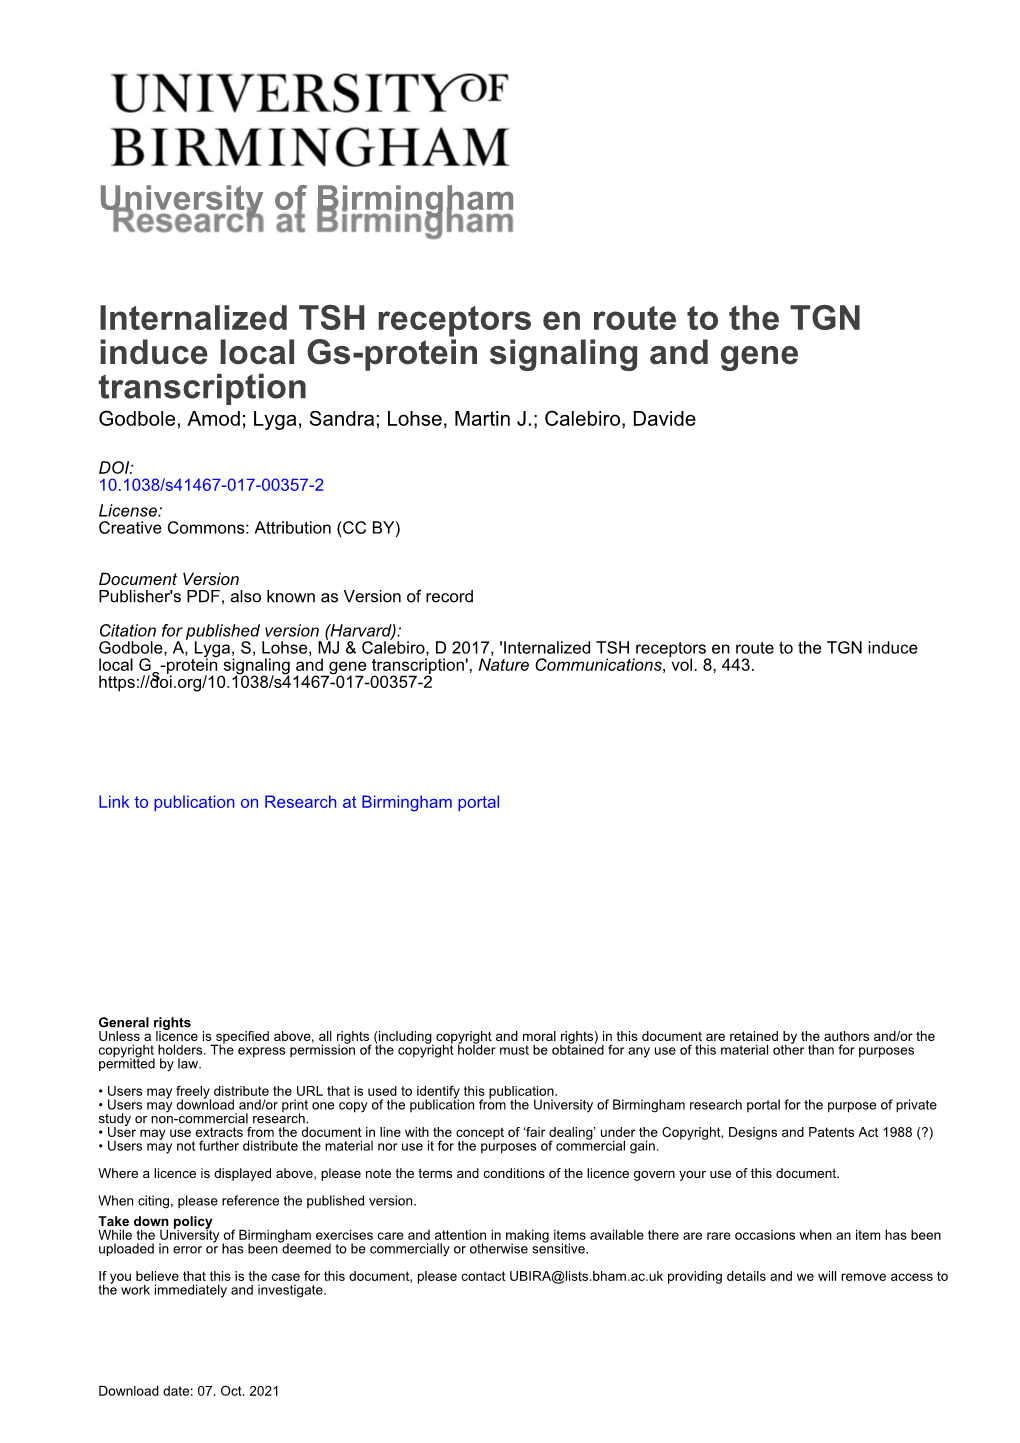 Internalized TSH Receptors En Route to the TGN Induce Local Gs